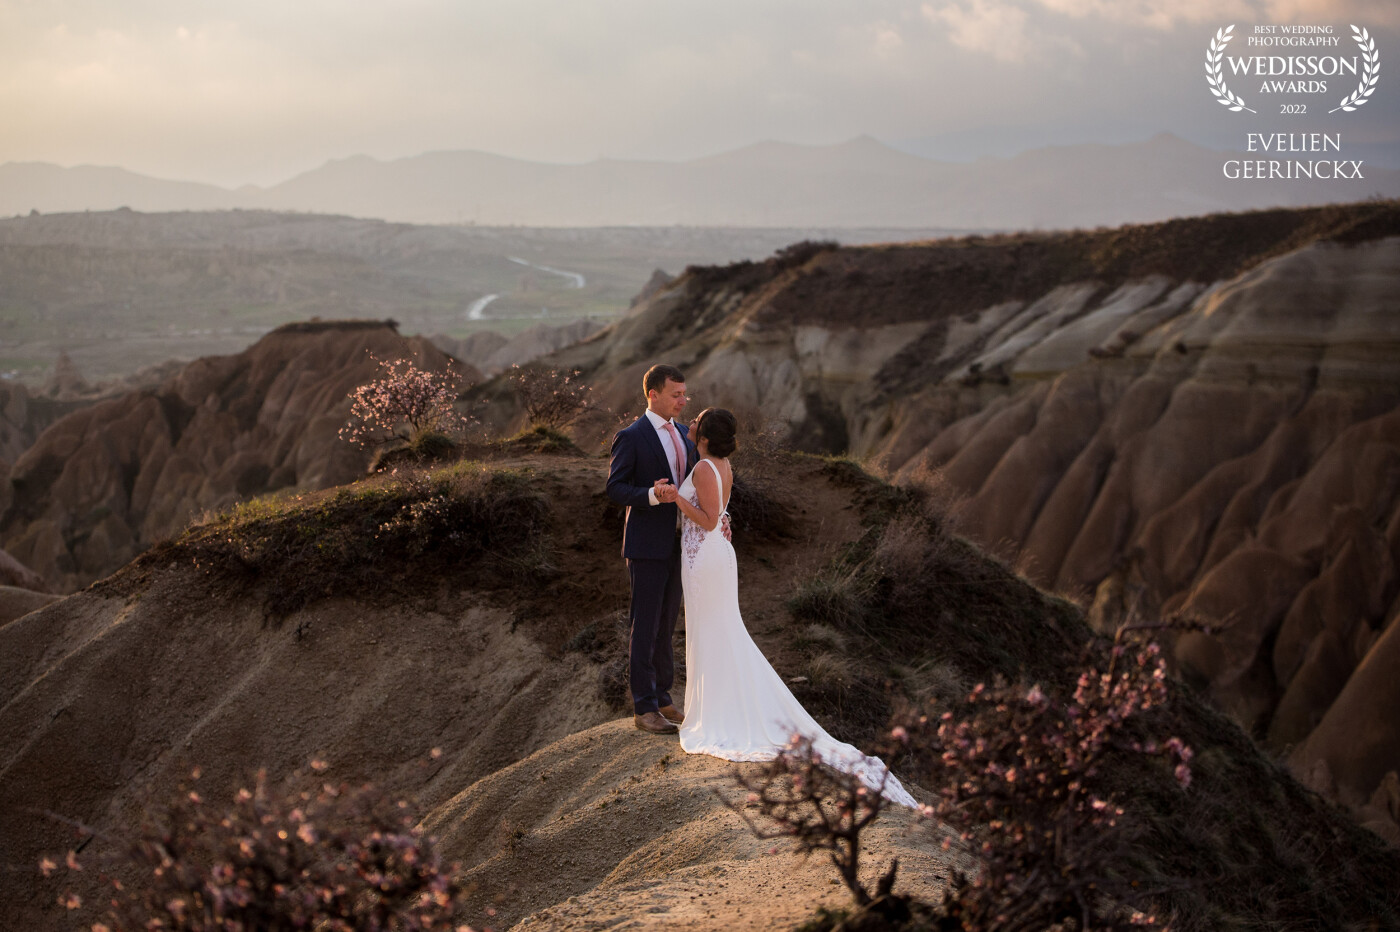 This was a sunset in Red Valley (Kızılçukur Valley) in Cappadocia (Turkey) - just fell in love with the light, the couple and the scenery!